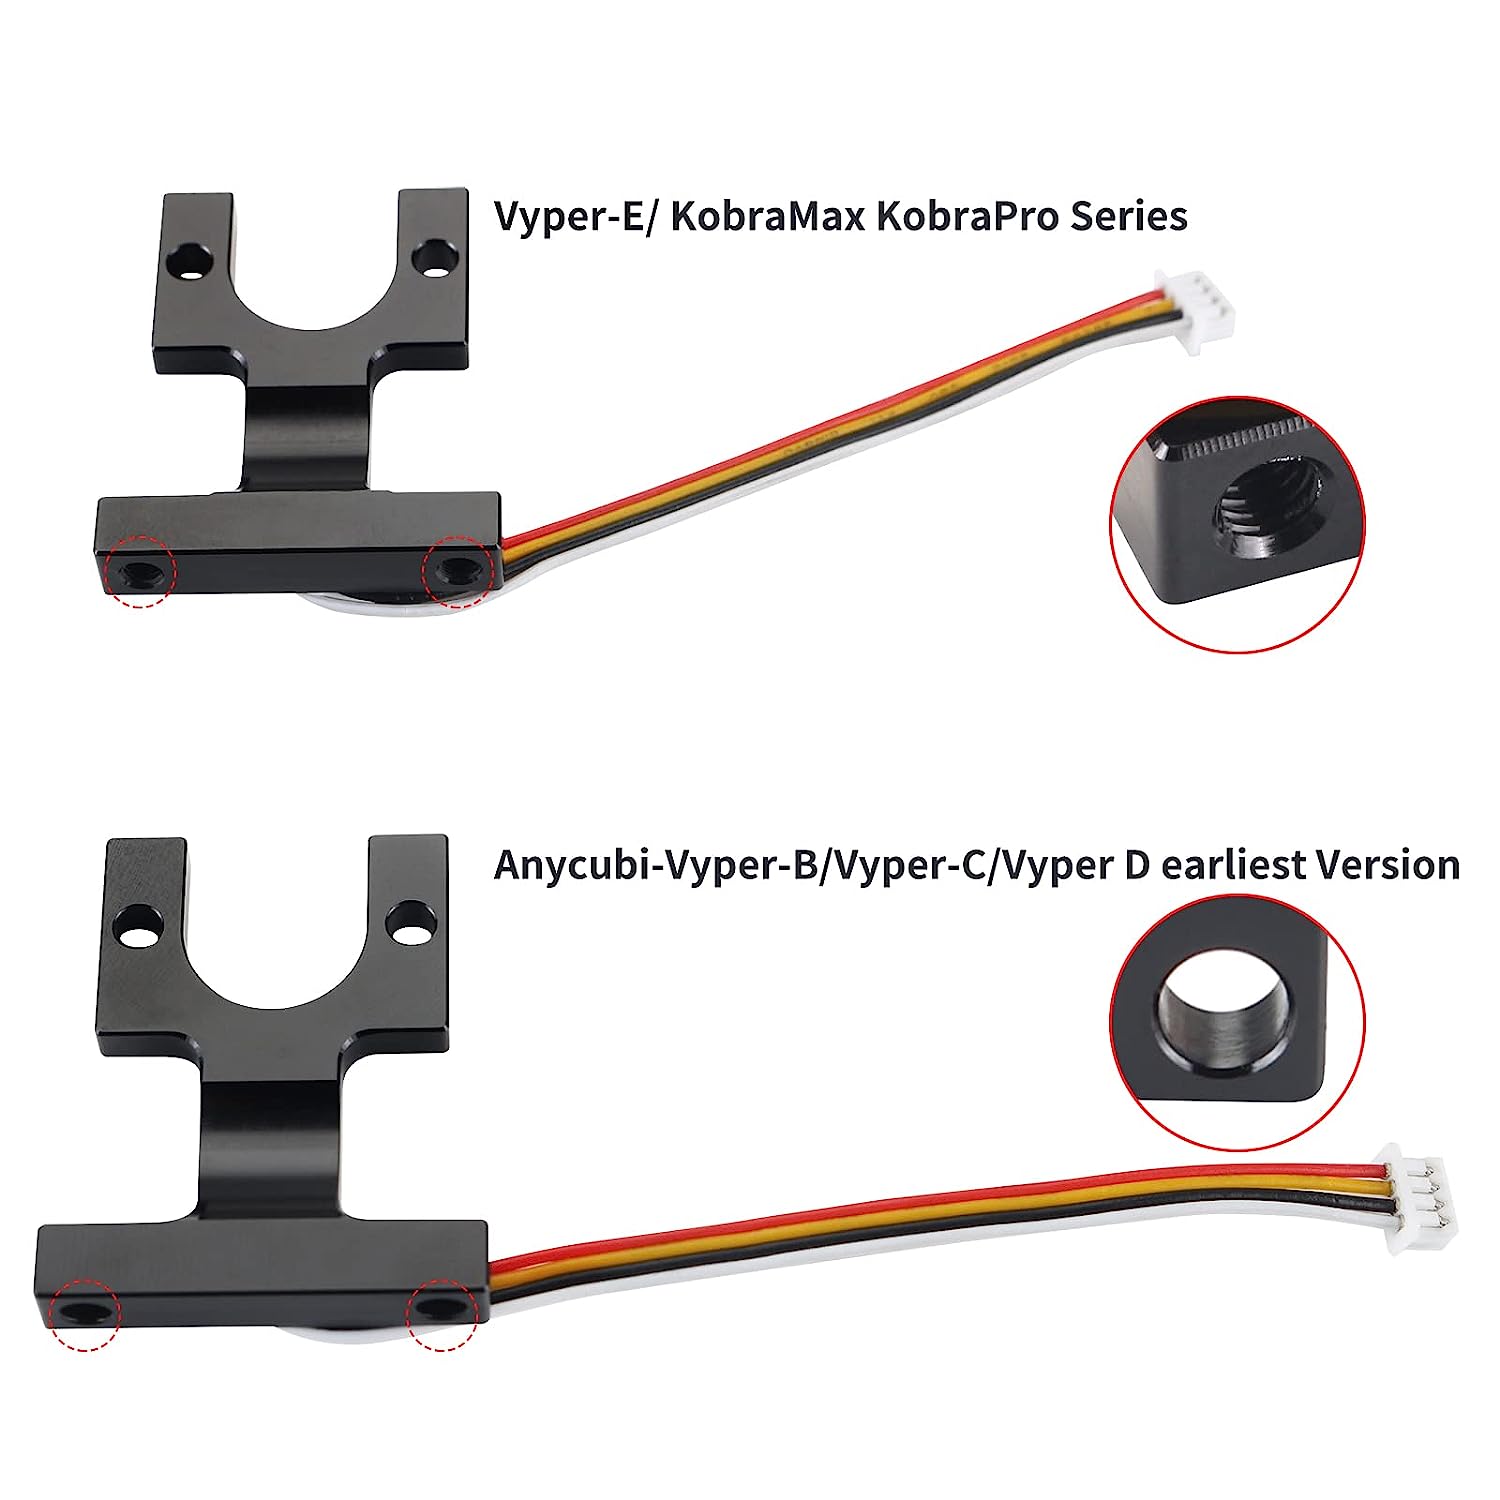 Anycubic Vyper bed auto levelling sensor strain gauge (A-D or E Series)